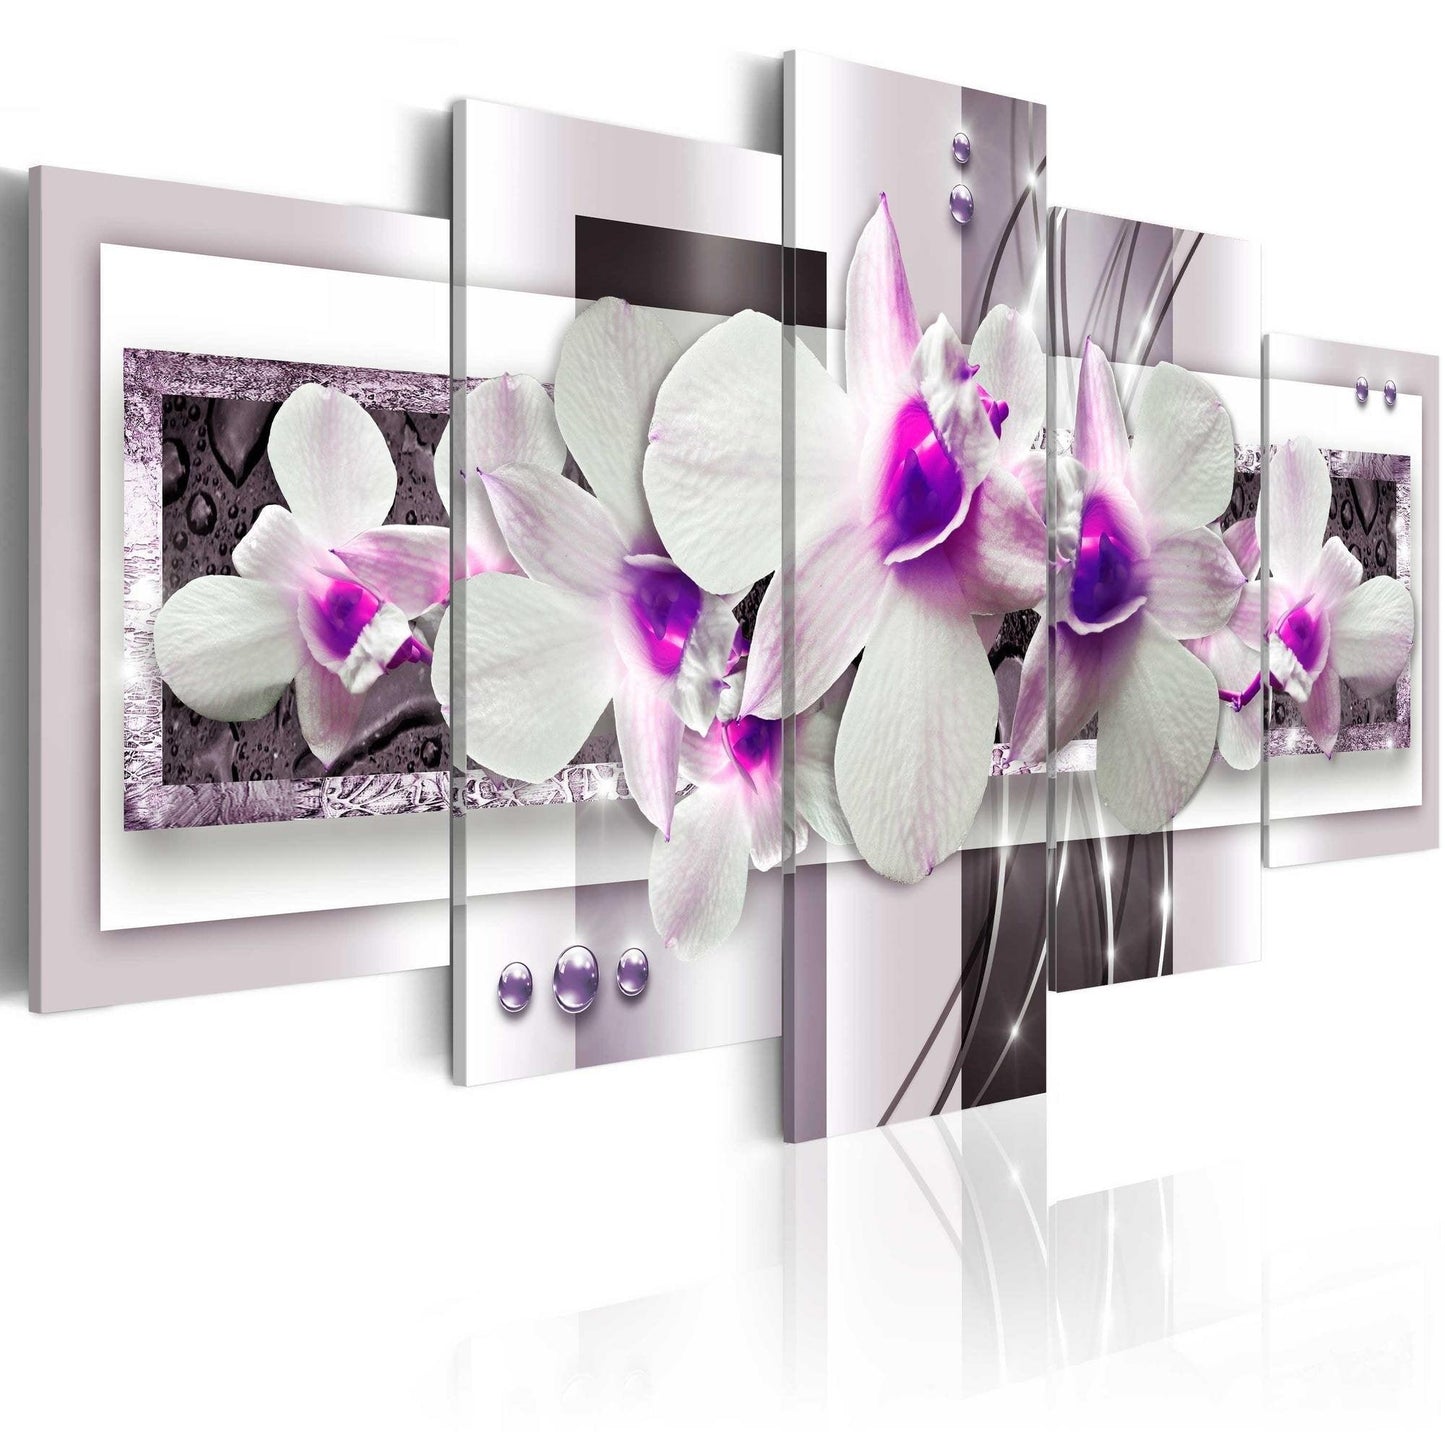 Canvas Print - With violet accent - www.trendingbestsellers.com